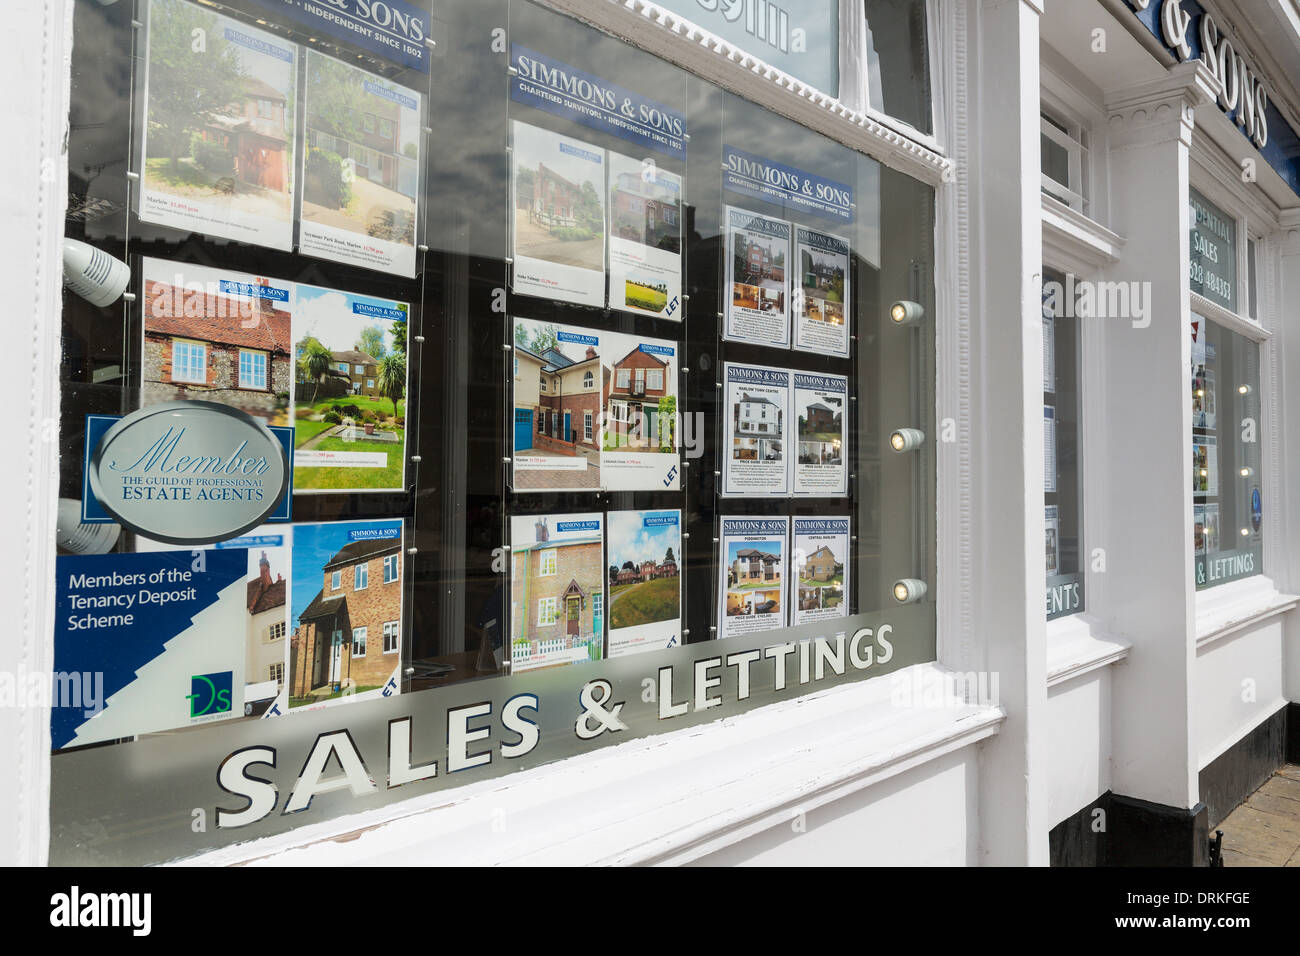 Simmons & Sons estate agents shop window Stock Photo